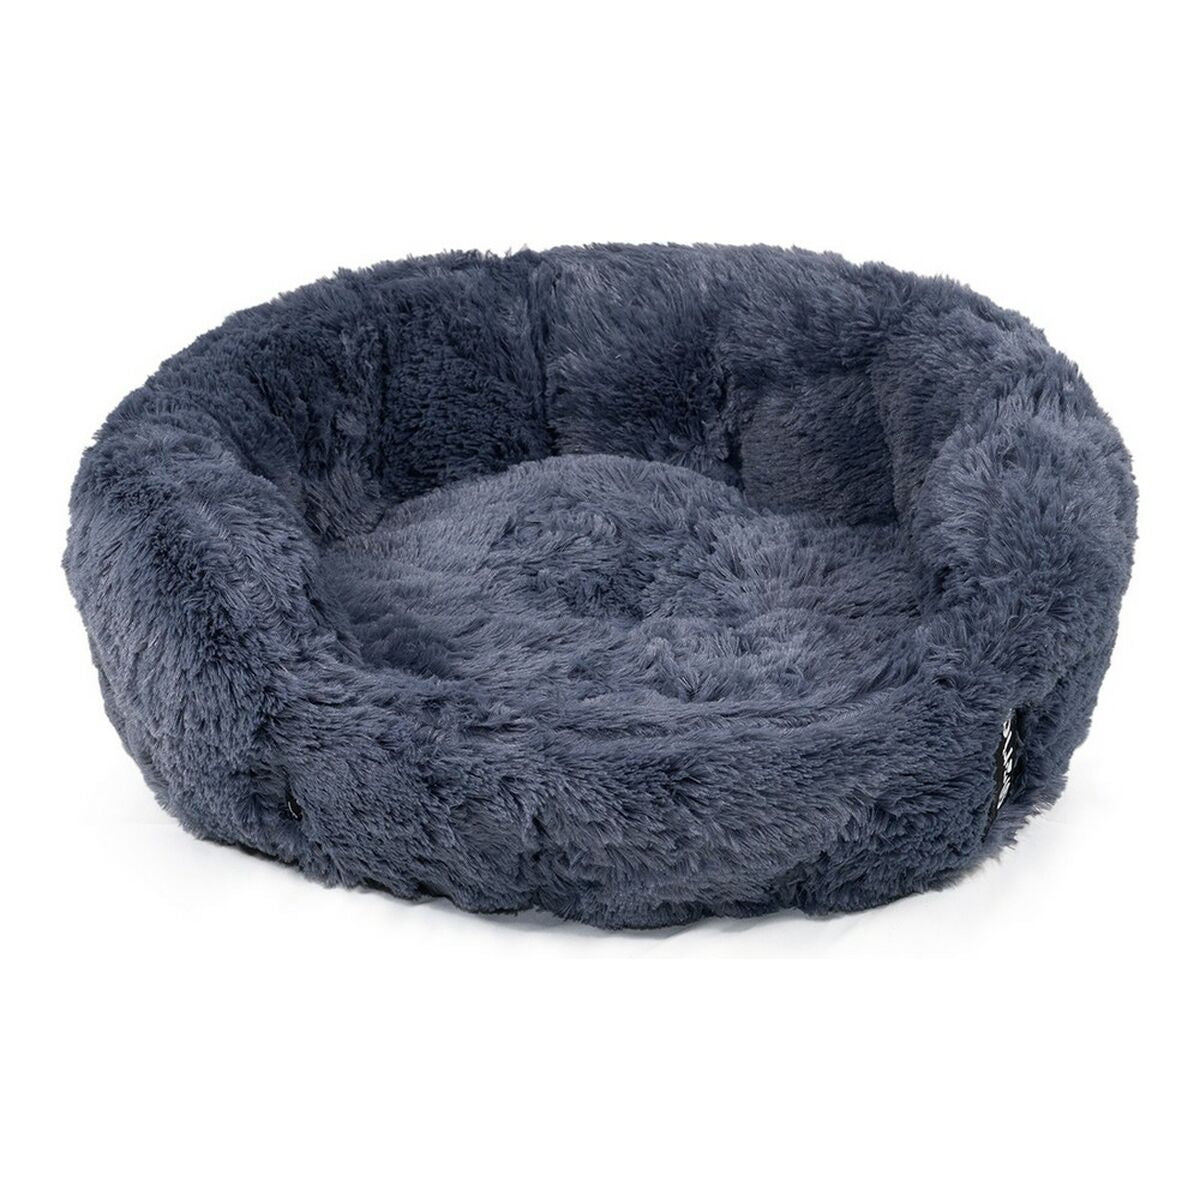 Soft, round cushion dog bed made from long plush material. Bed for Dogs Gloria BABY Grey (75 x 65 cm)